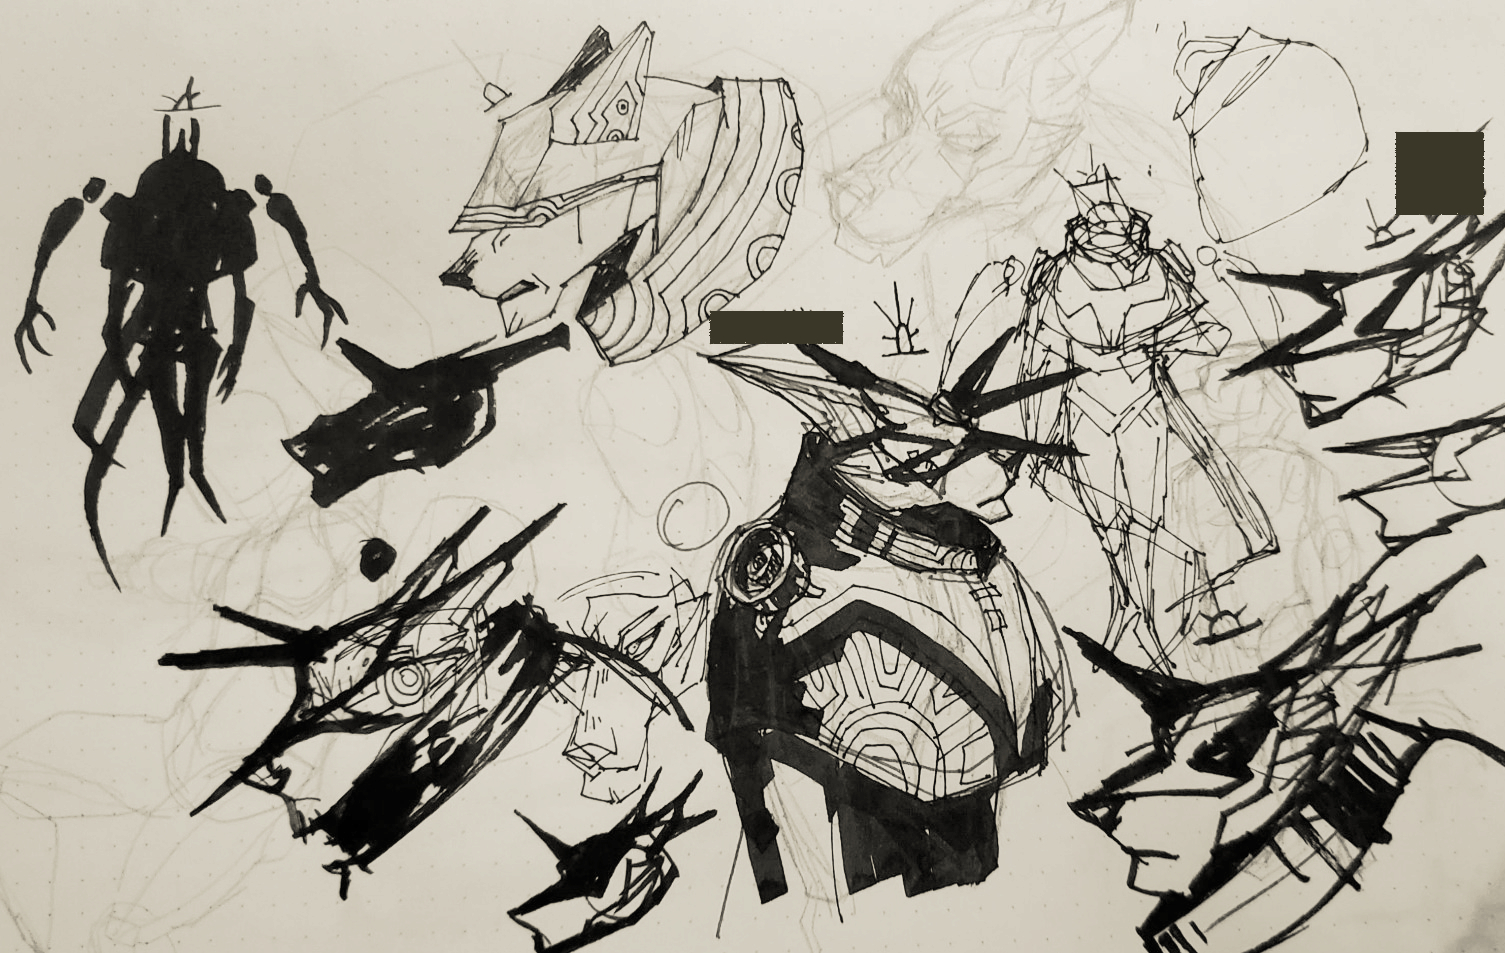 Several sketches of hound-like beings with odd head gear, as well as a silhouette of the character featured above.